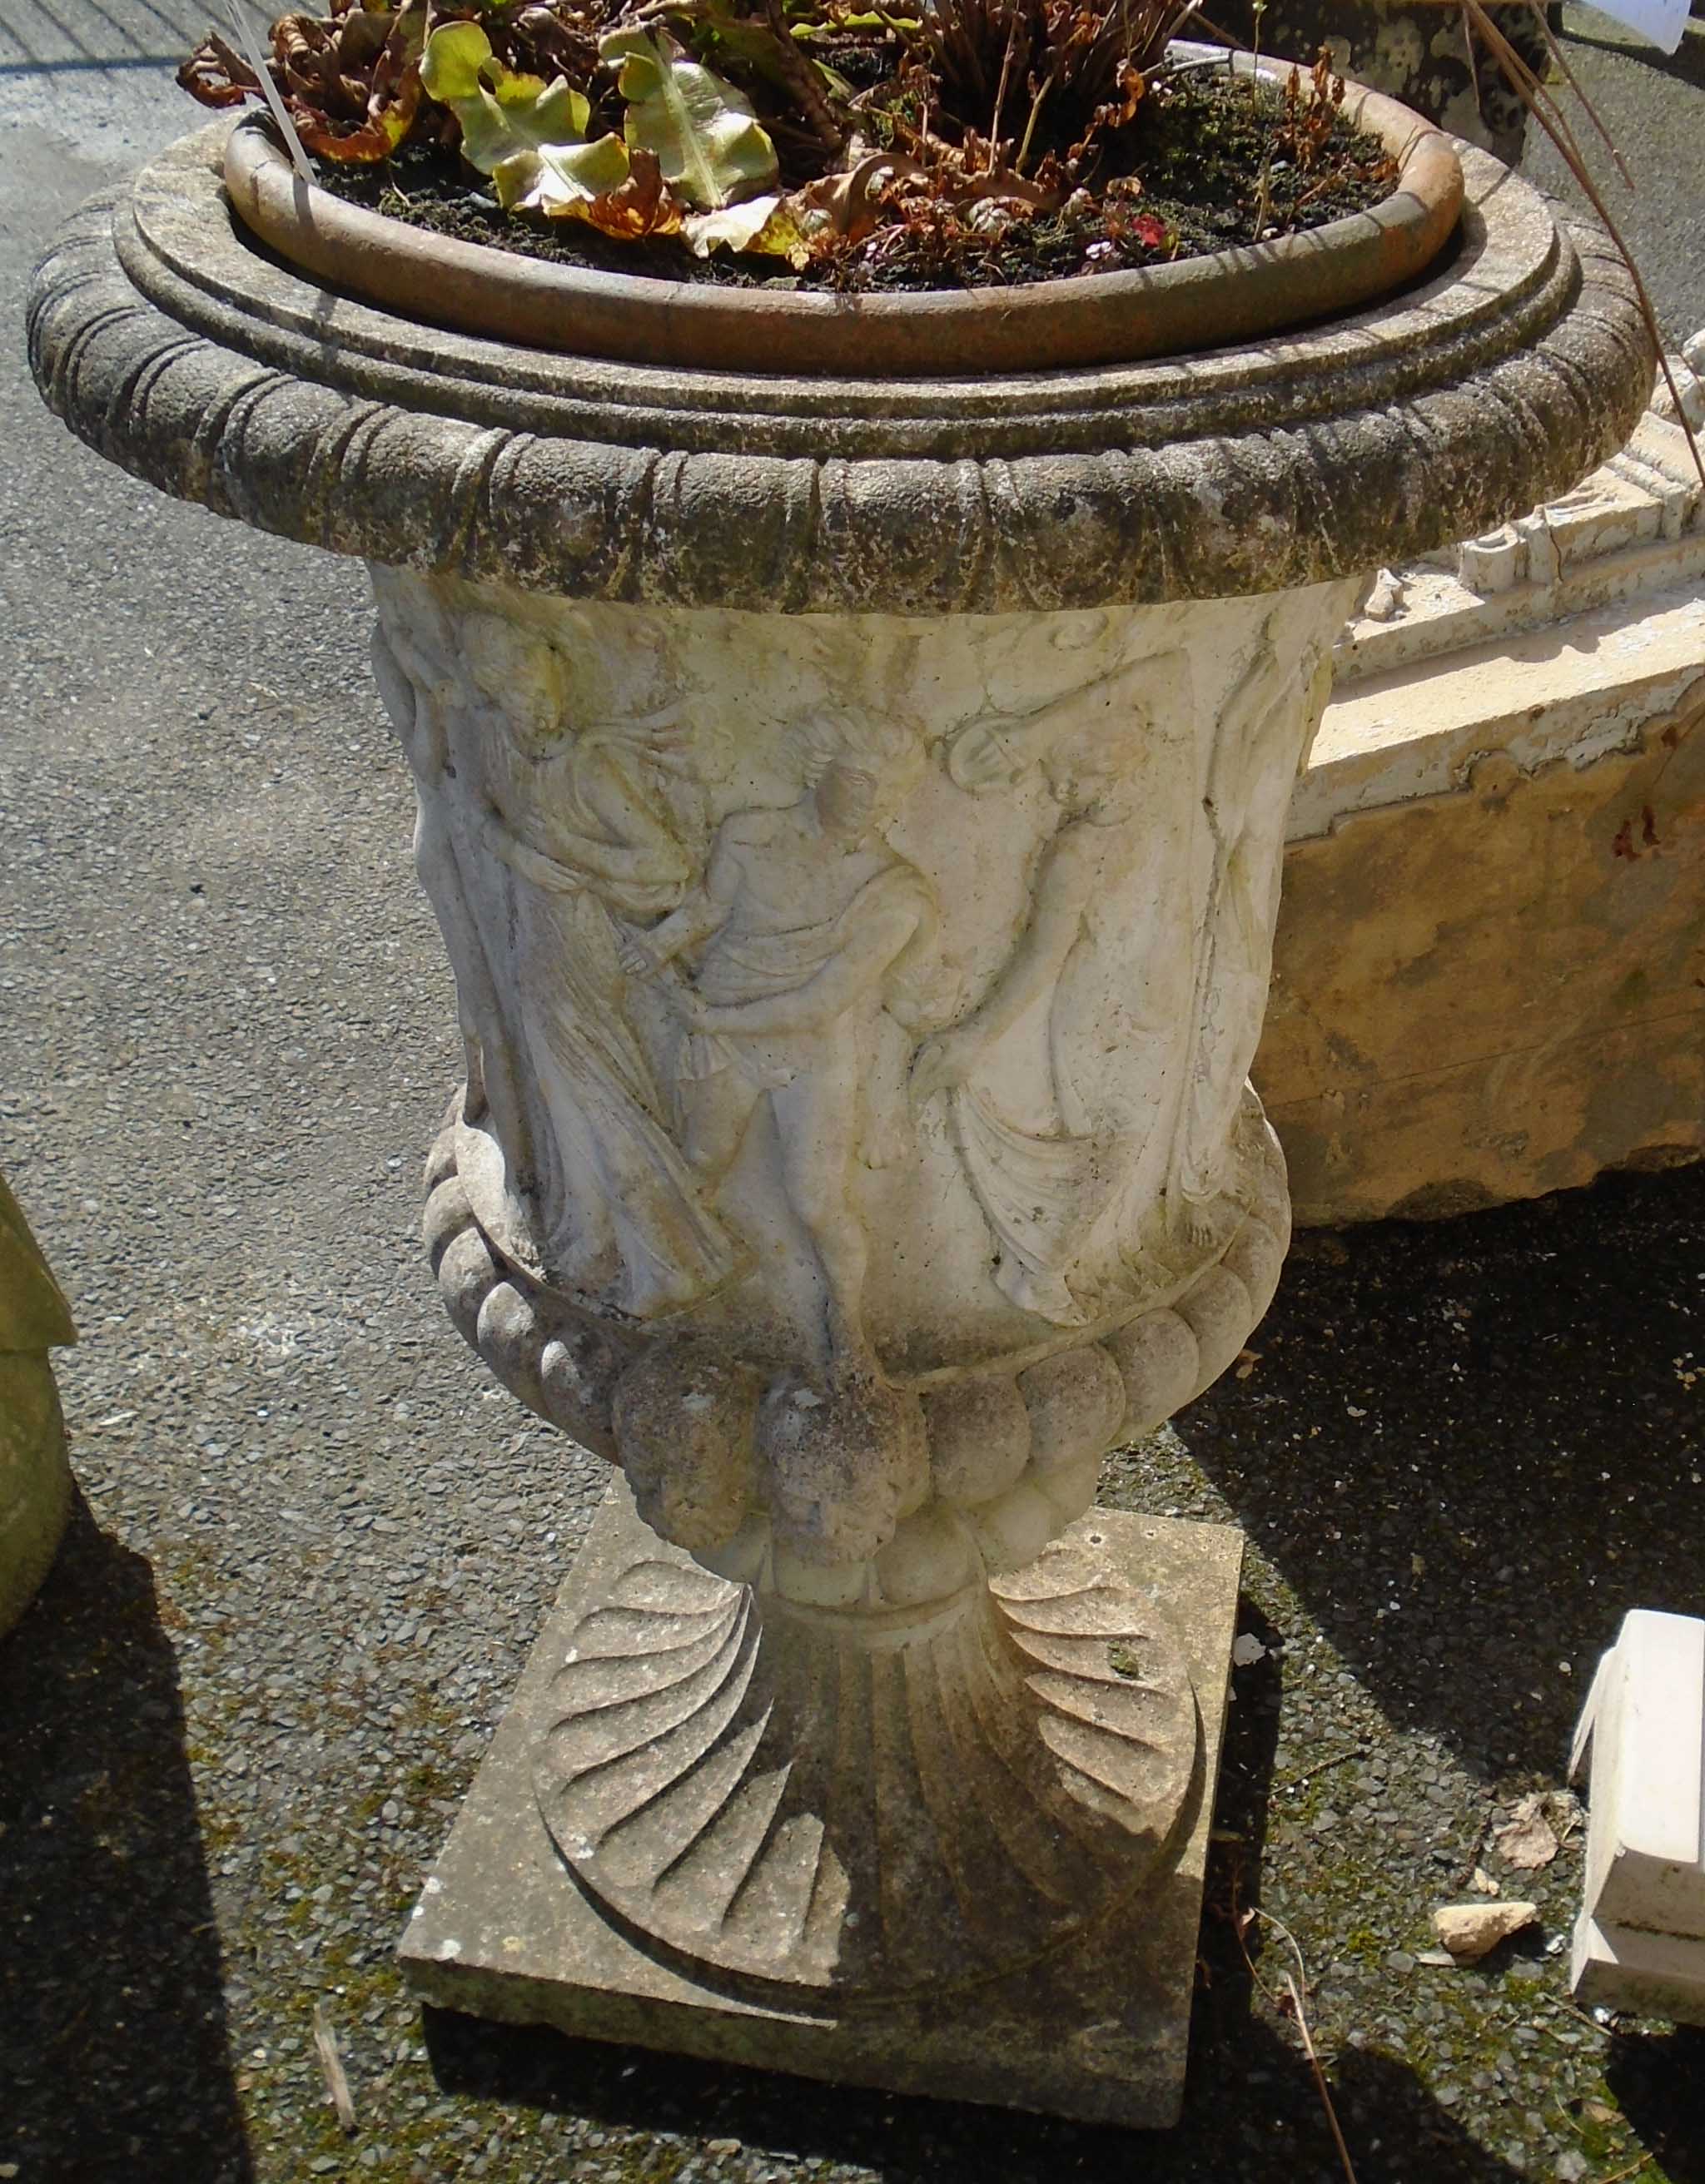 A 3' 1" pre-cast garden planter in the form of a Classical urn with figural decoration